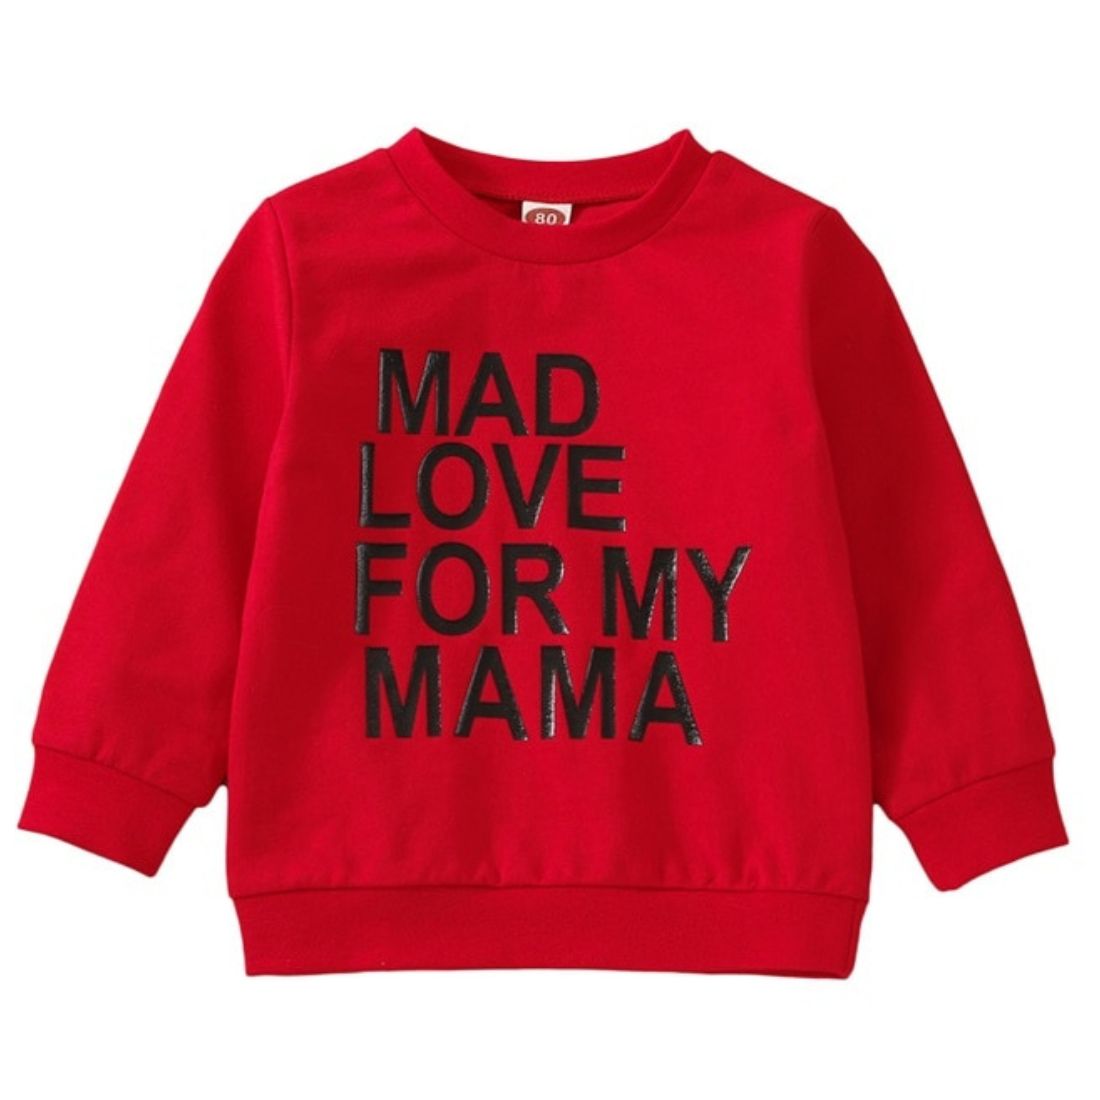 A trendy toddler boys red sweatshirt with "mad love for my mama" letter print